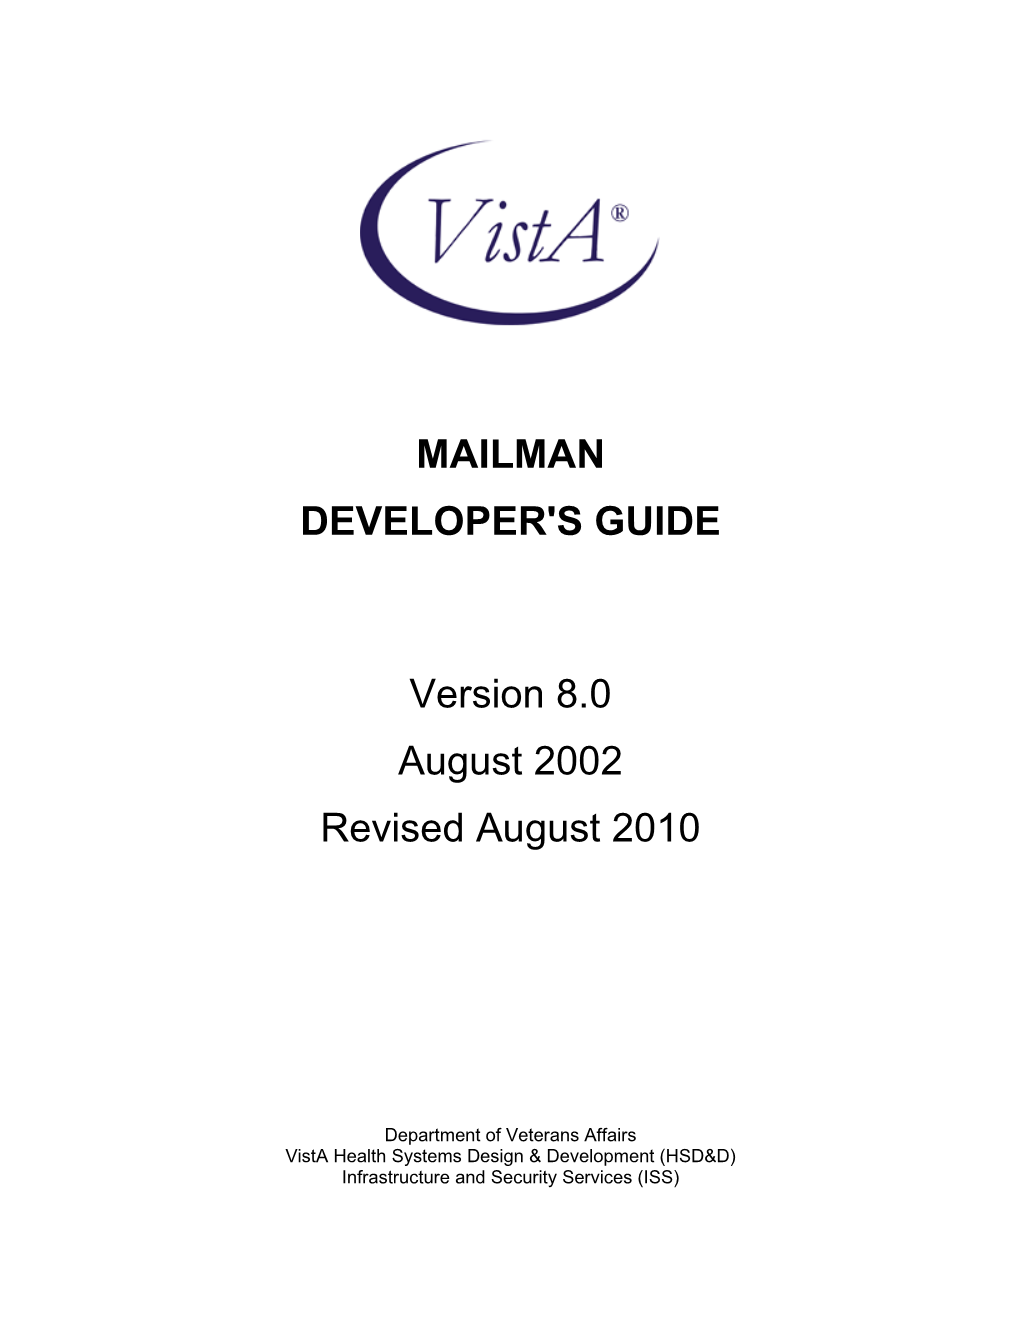 Mailman Developer's Guide Iii Revised August 2010 Version 8.0 Revision History